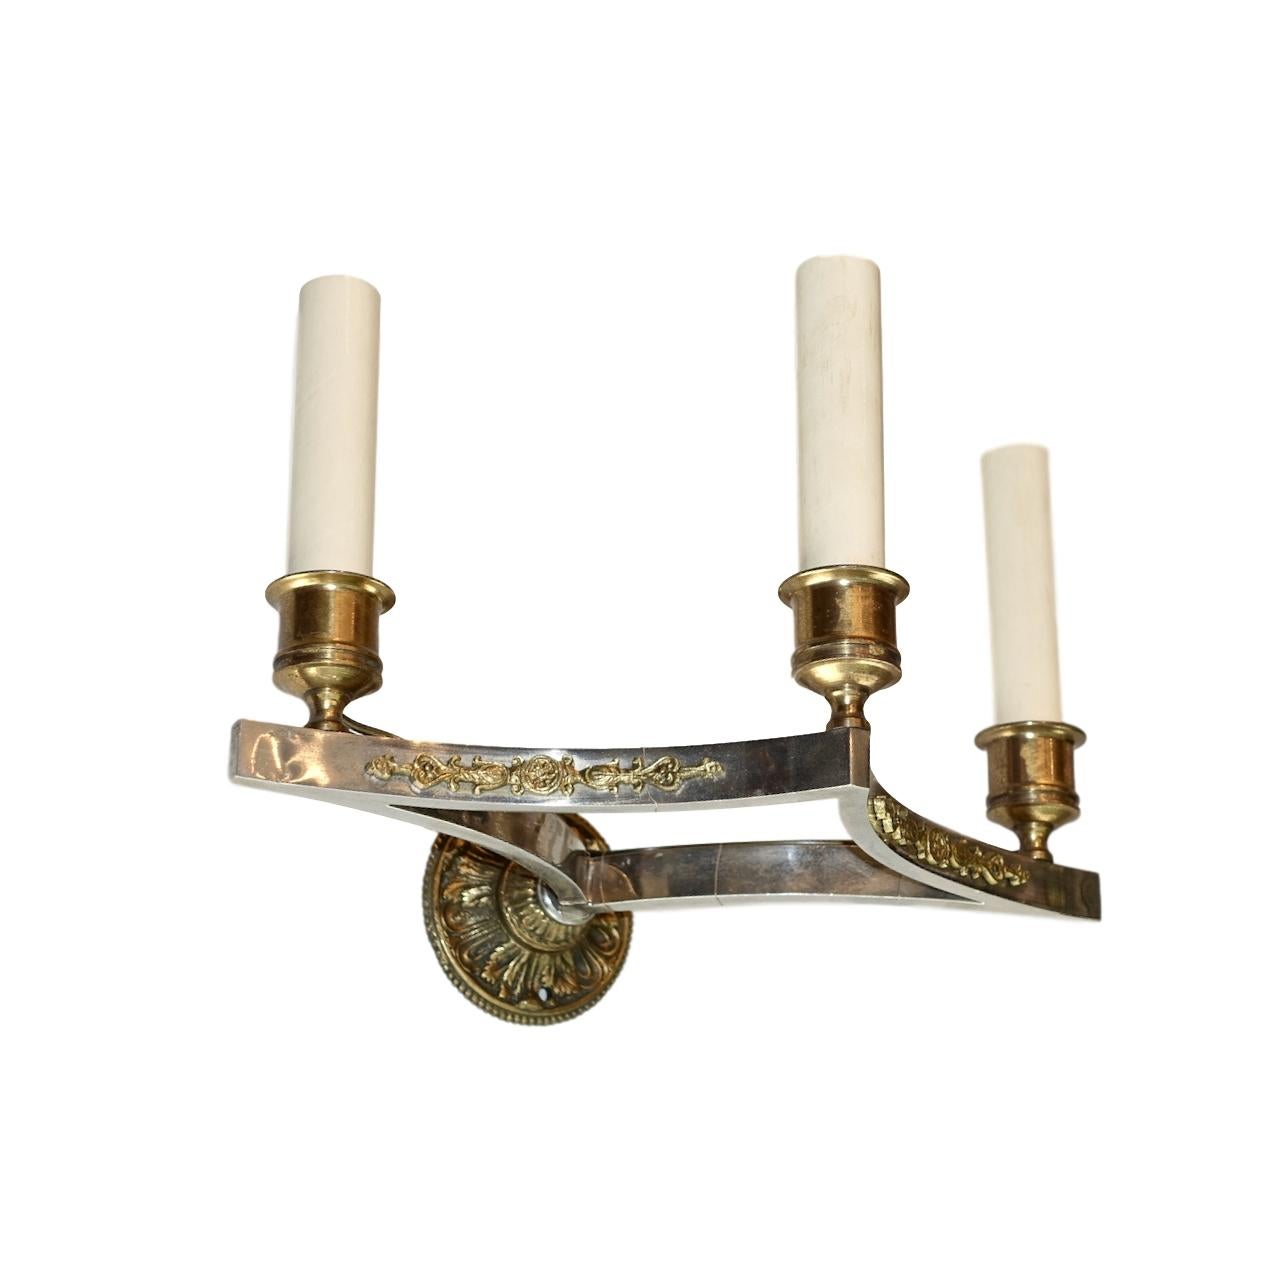 A pair of circa 1940s French Empire sconces with gilt details and backplate.

Measurements:
Height 8